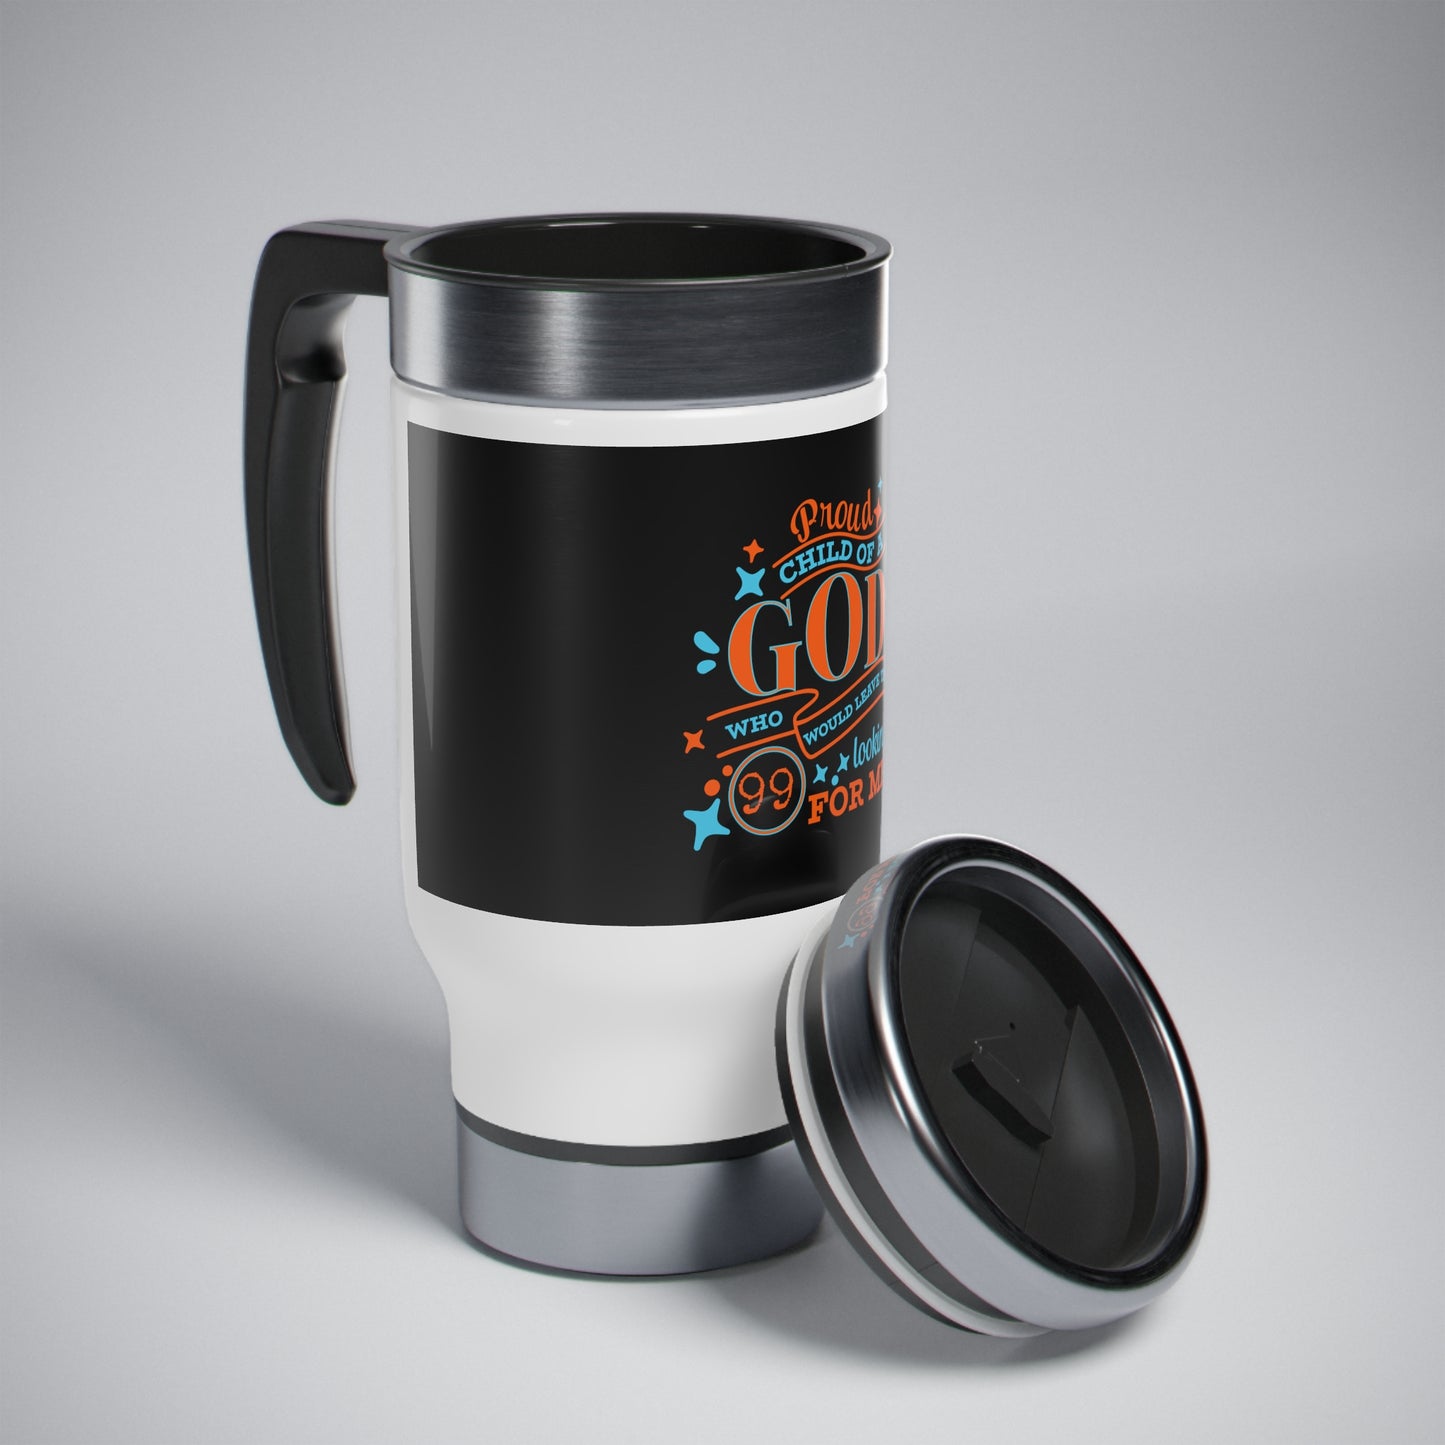 Proud Child Of A God Who Would Leave The 99 Looking For Me (2) Travel Mug with Handle, 14oz